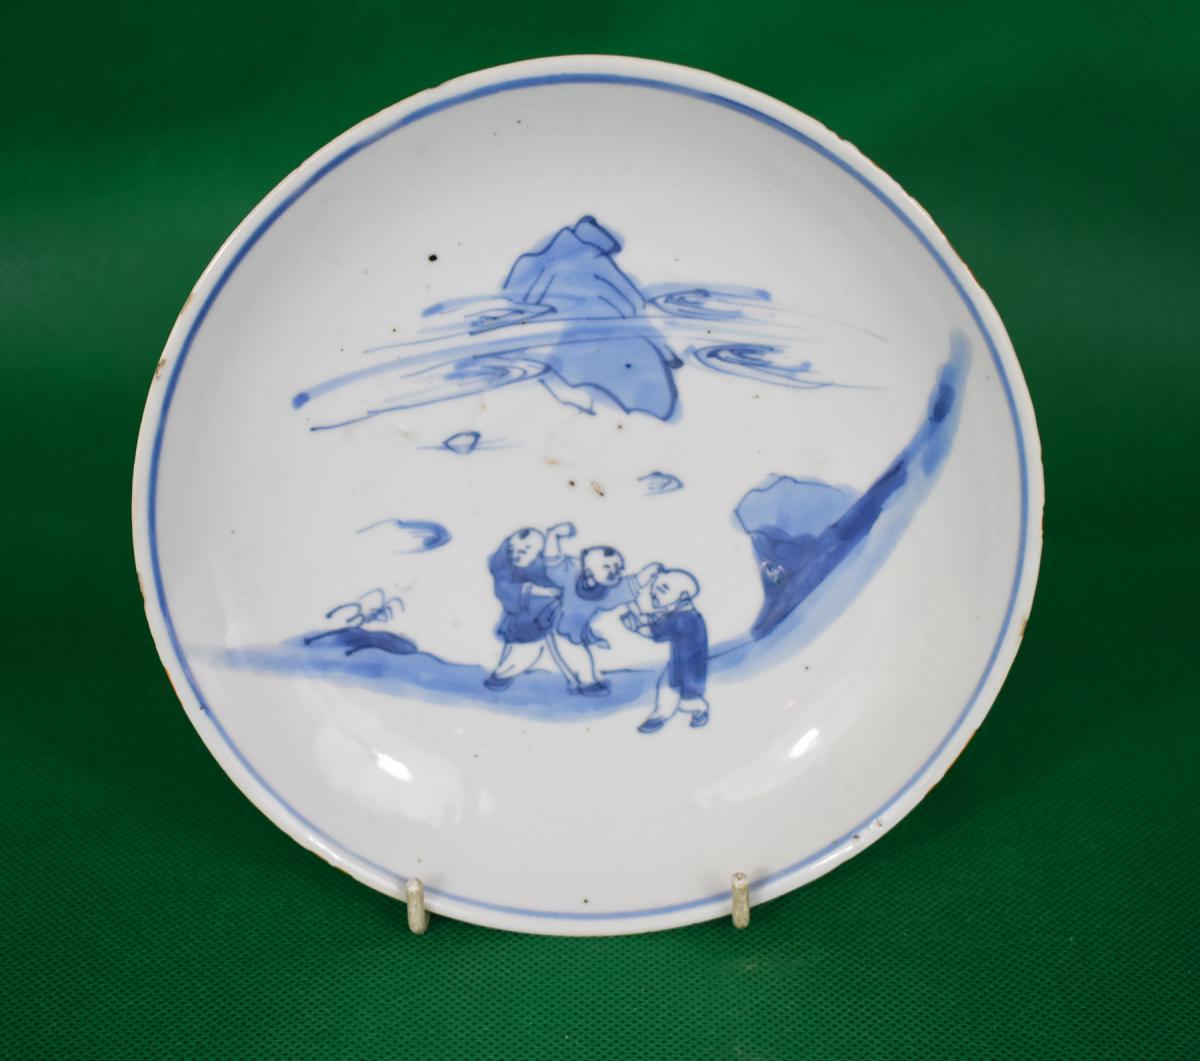 Blue and White porcelain - Tianqi 1621-1627